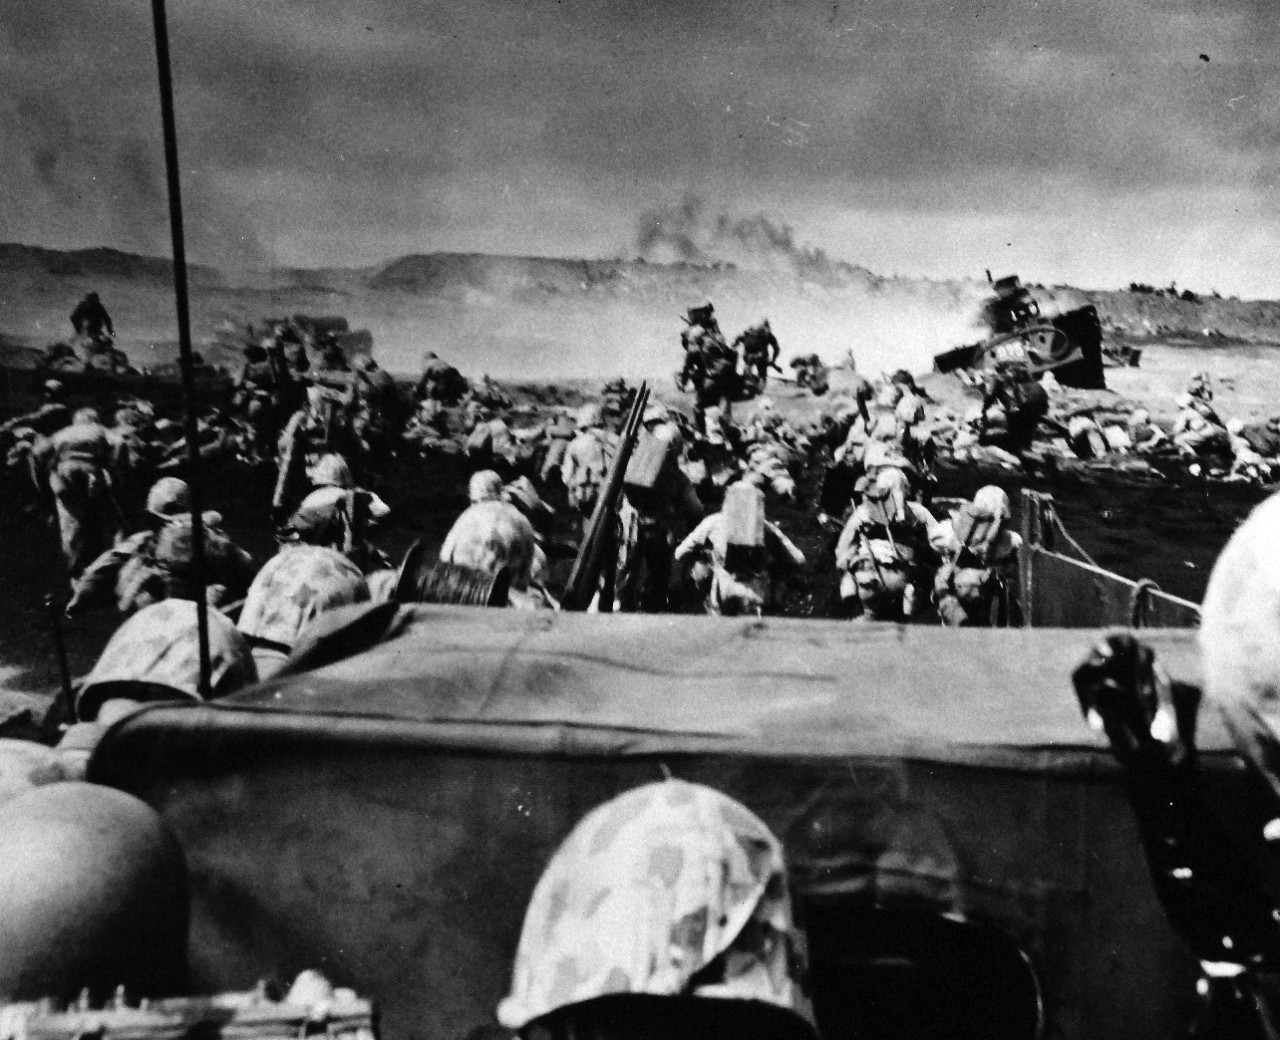 80-G-304843:  LCVP at Battle for Iwo Jima, February 19, 1945. A wave of Fourth Division Marines beginning an attack from the beach at Iwo Jima.  Another assault boat loaded with veterans is landed on the beach by an invasion craft.  Photograph released February 19, 1945.  U.S. Navy Photograph now in the collections of the National Archives.